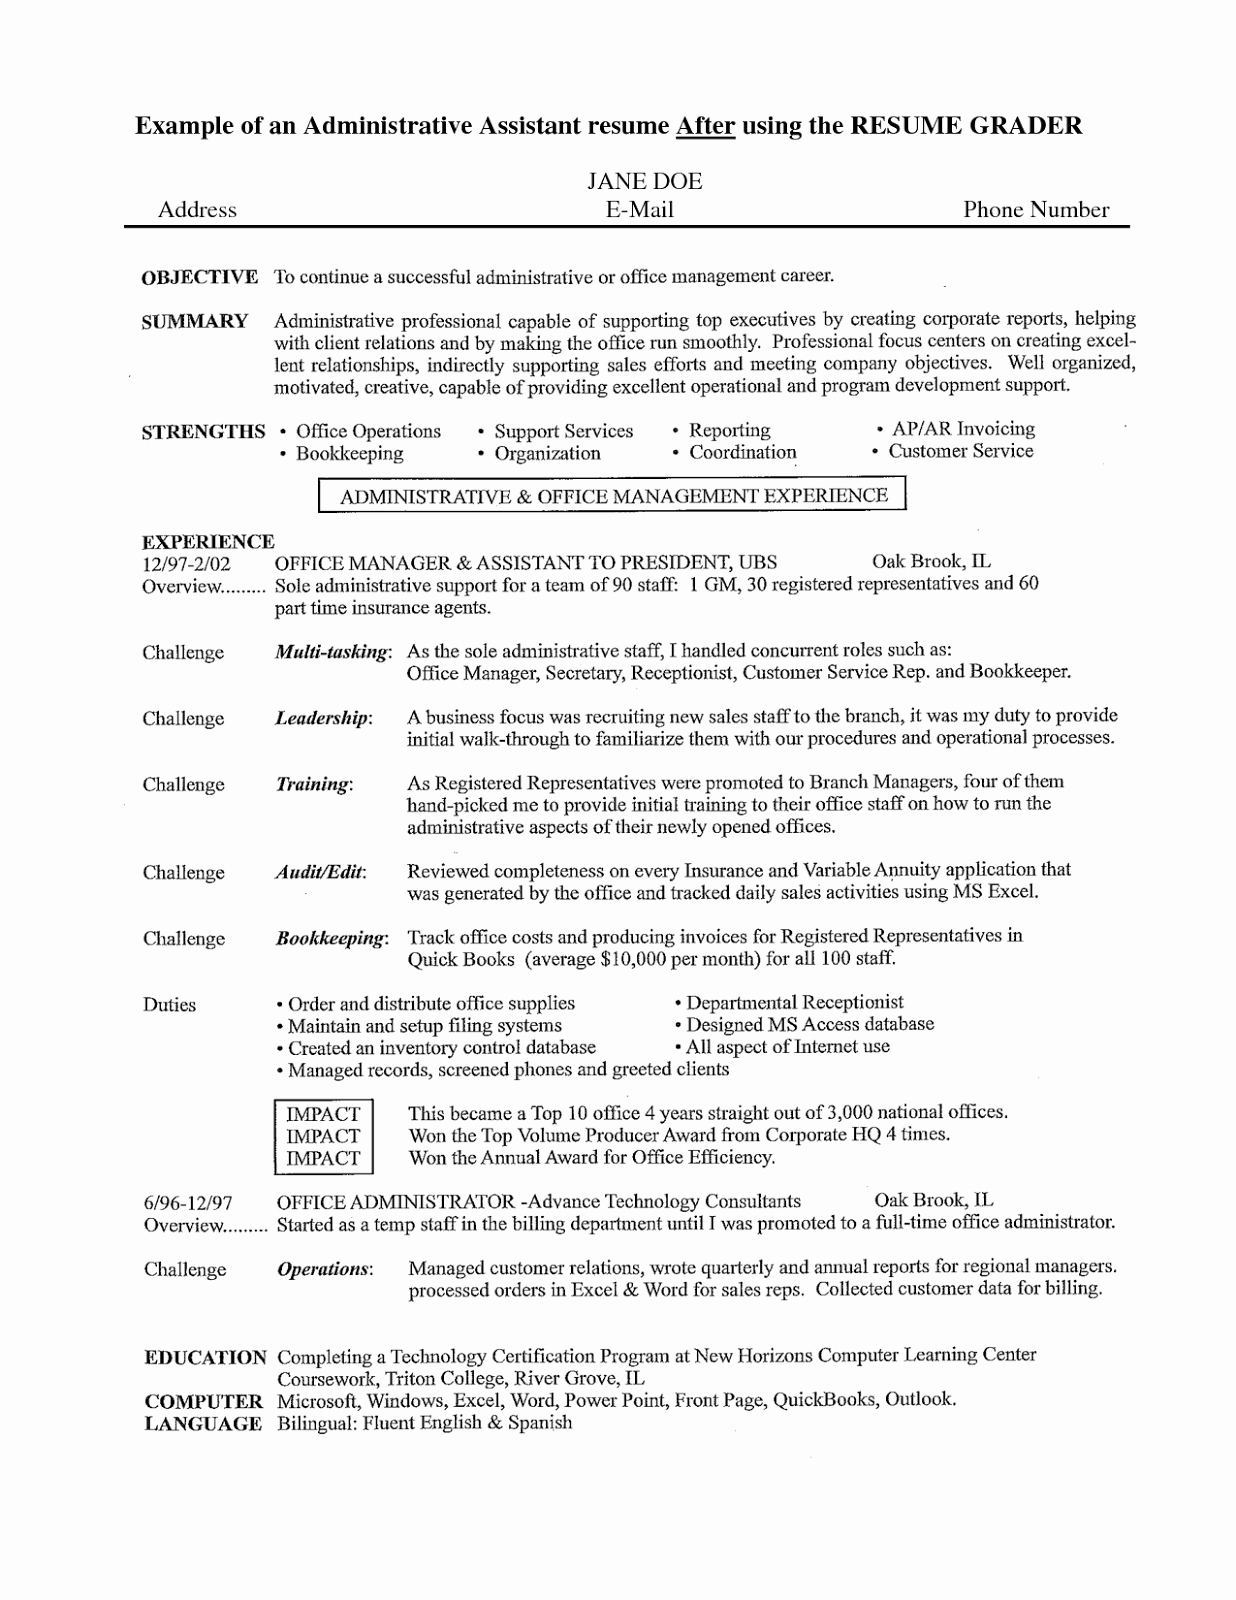 Administrative assistant Resume Objective Luxury Sample Objective Resume for Administrative assistant